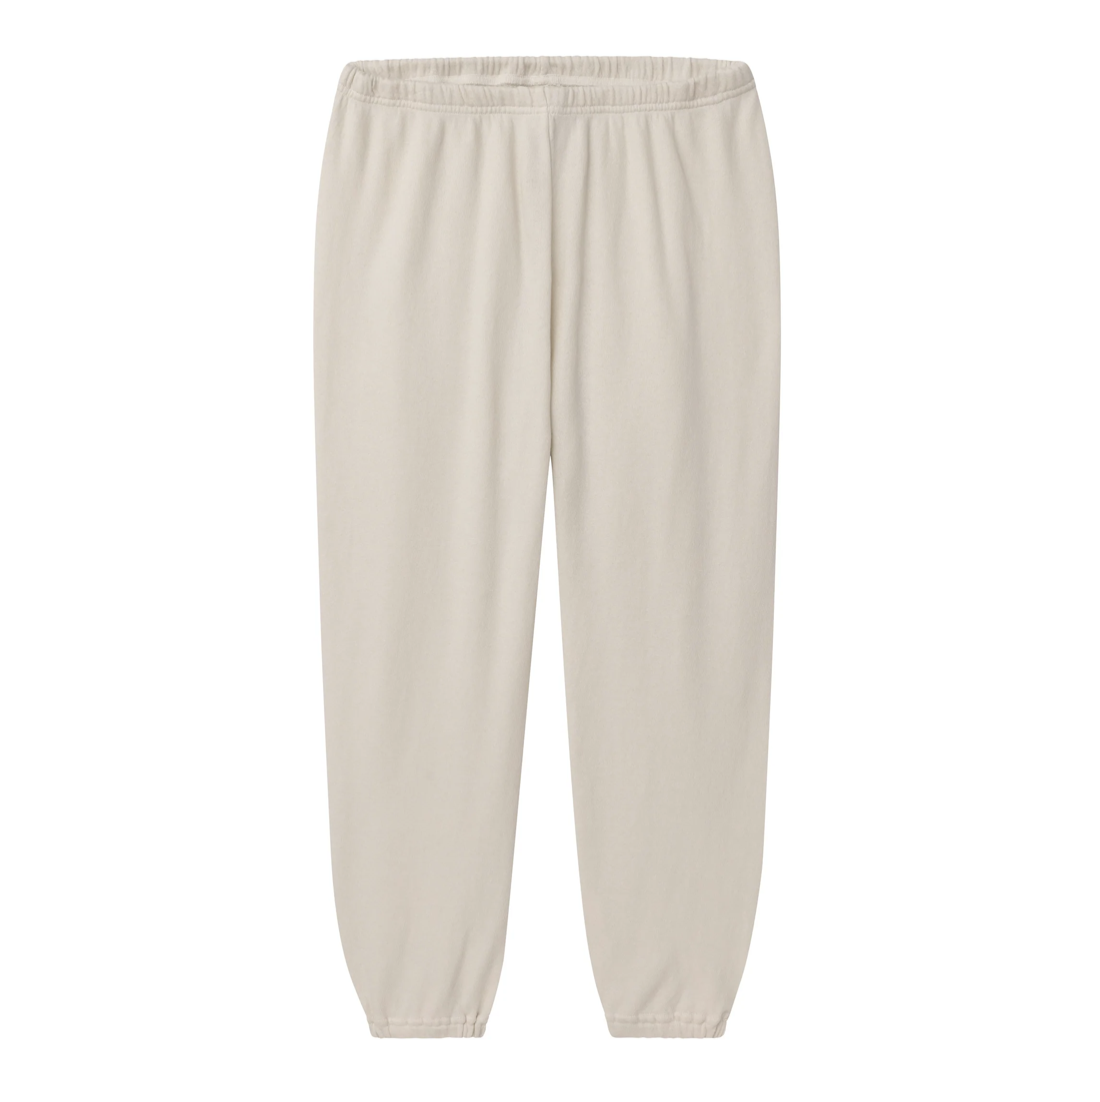 The Stadium Sweatpant in Washed White